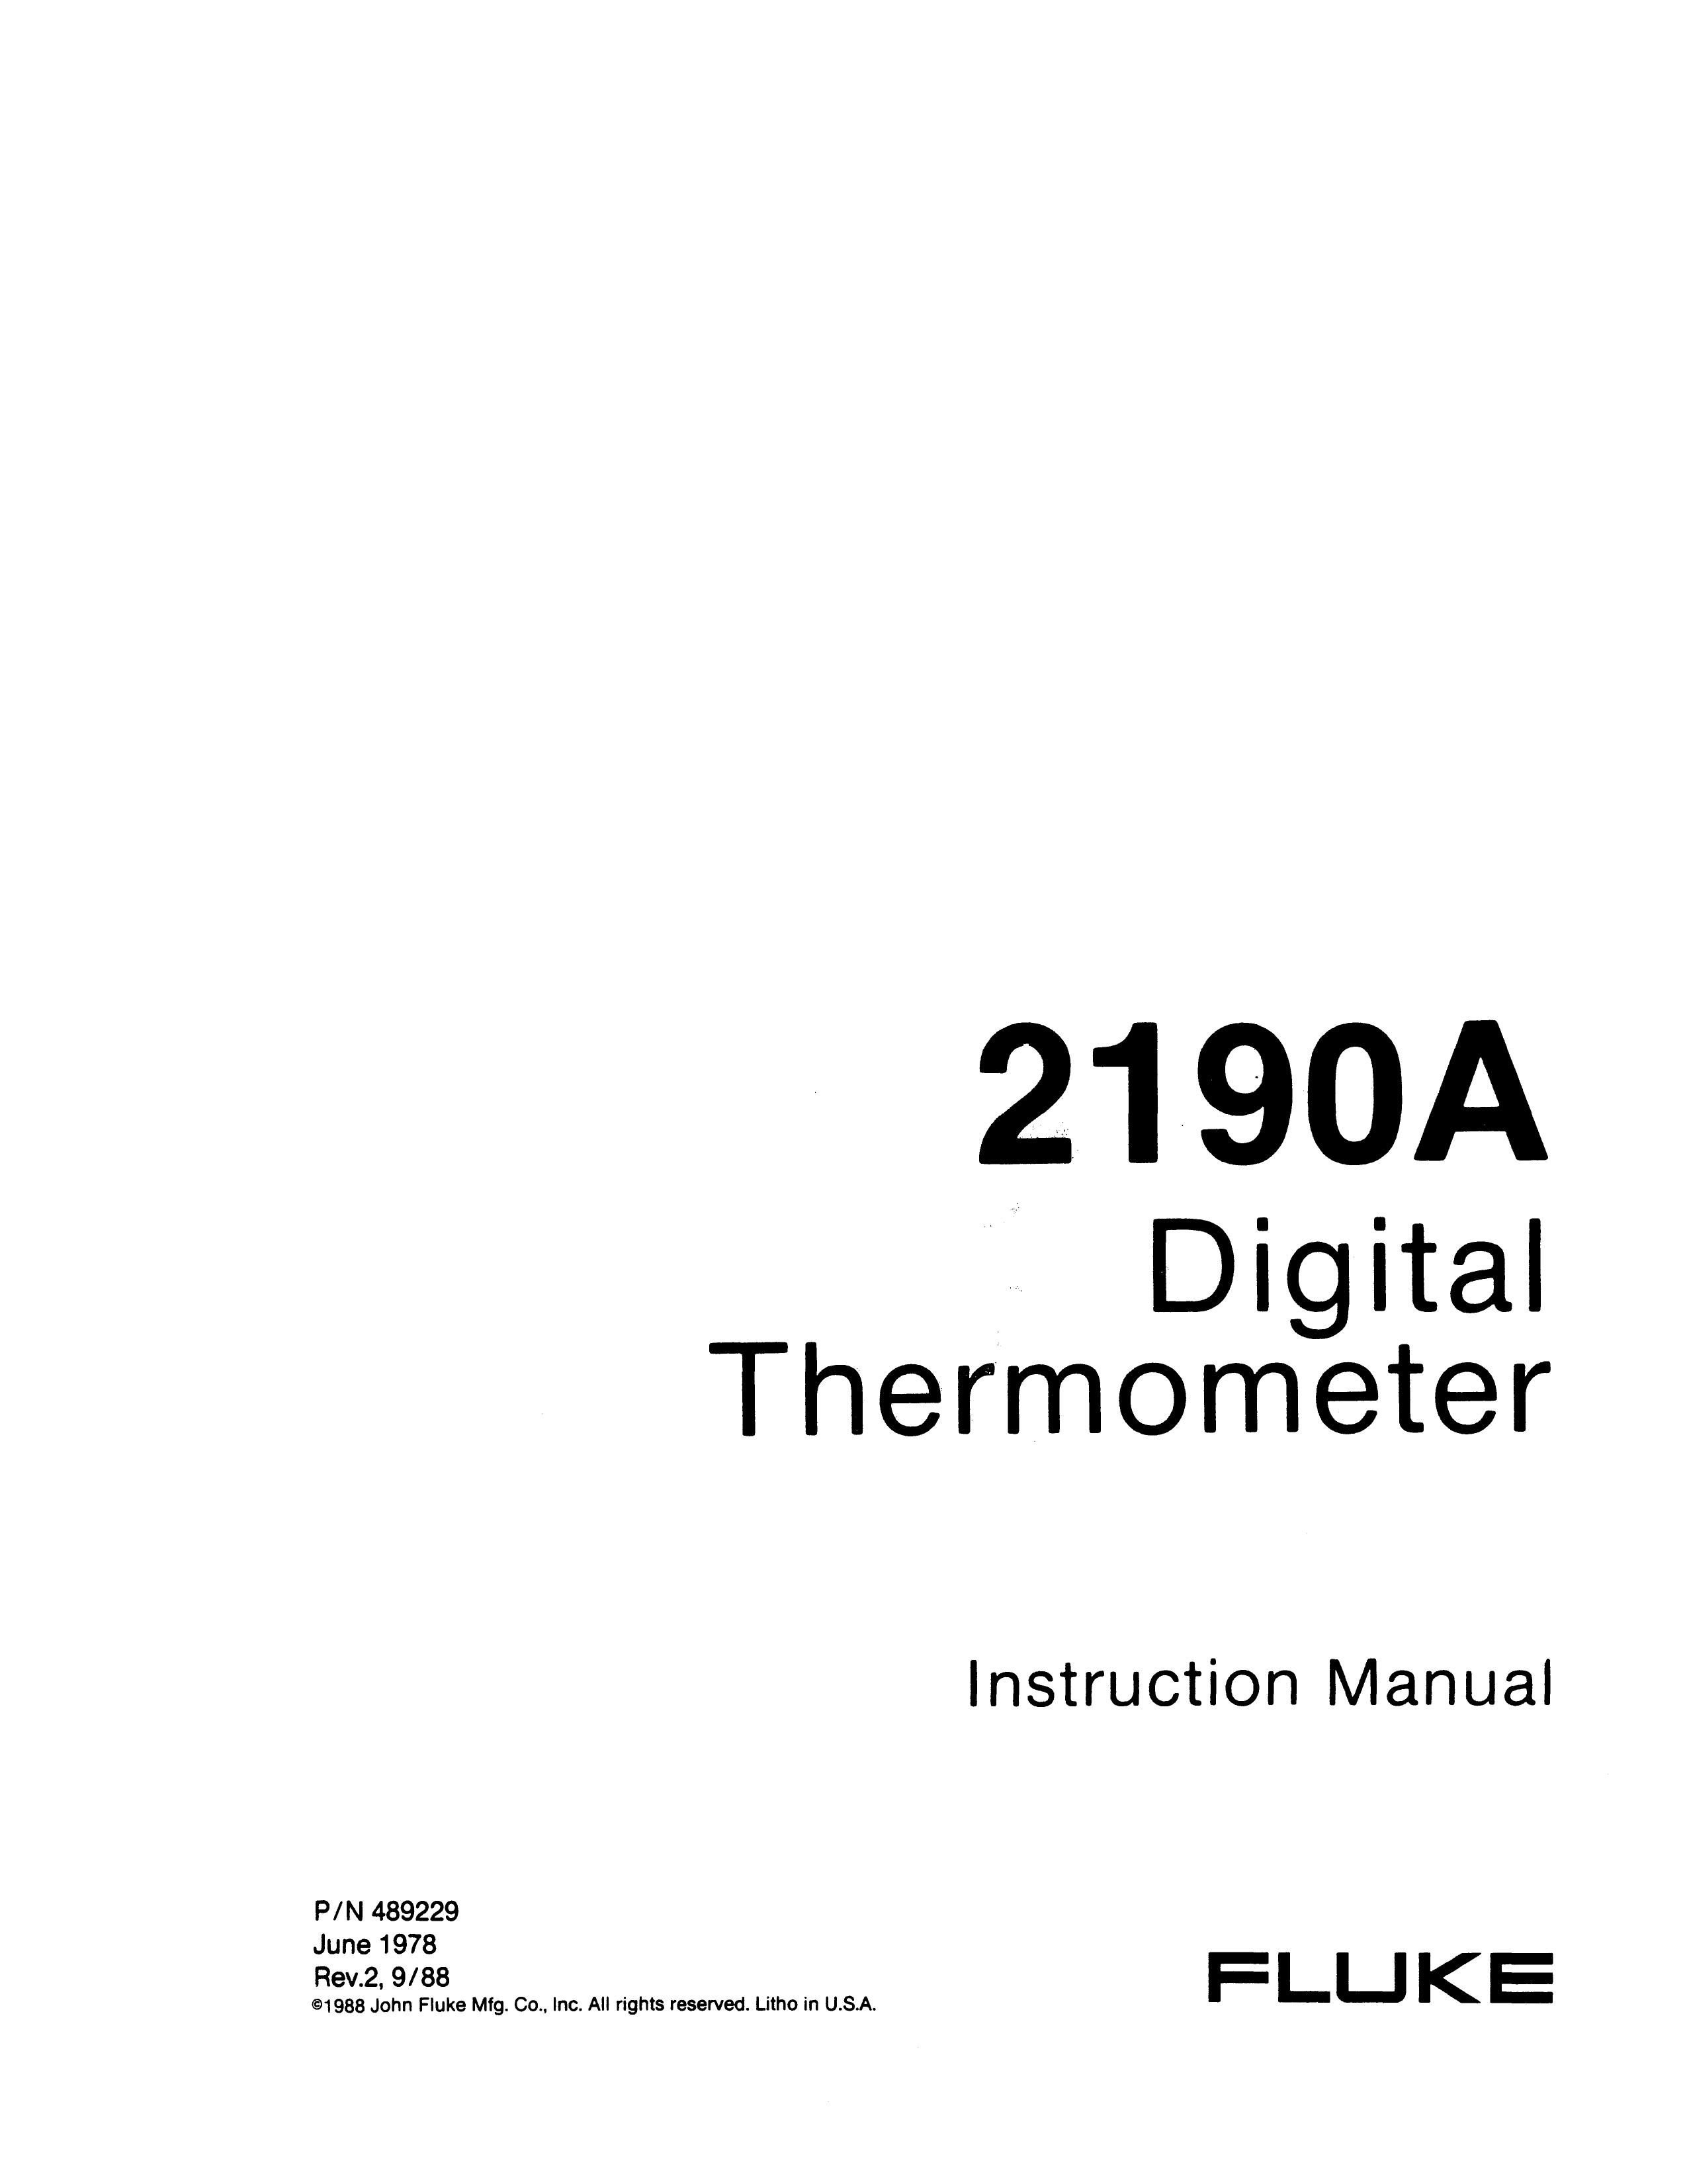 Fluke 2190A Thermometer User Manual